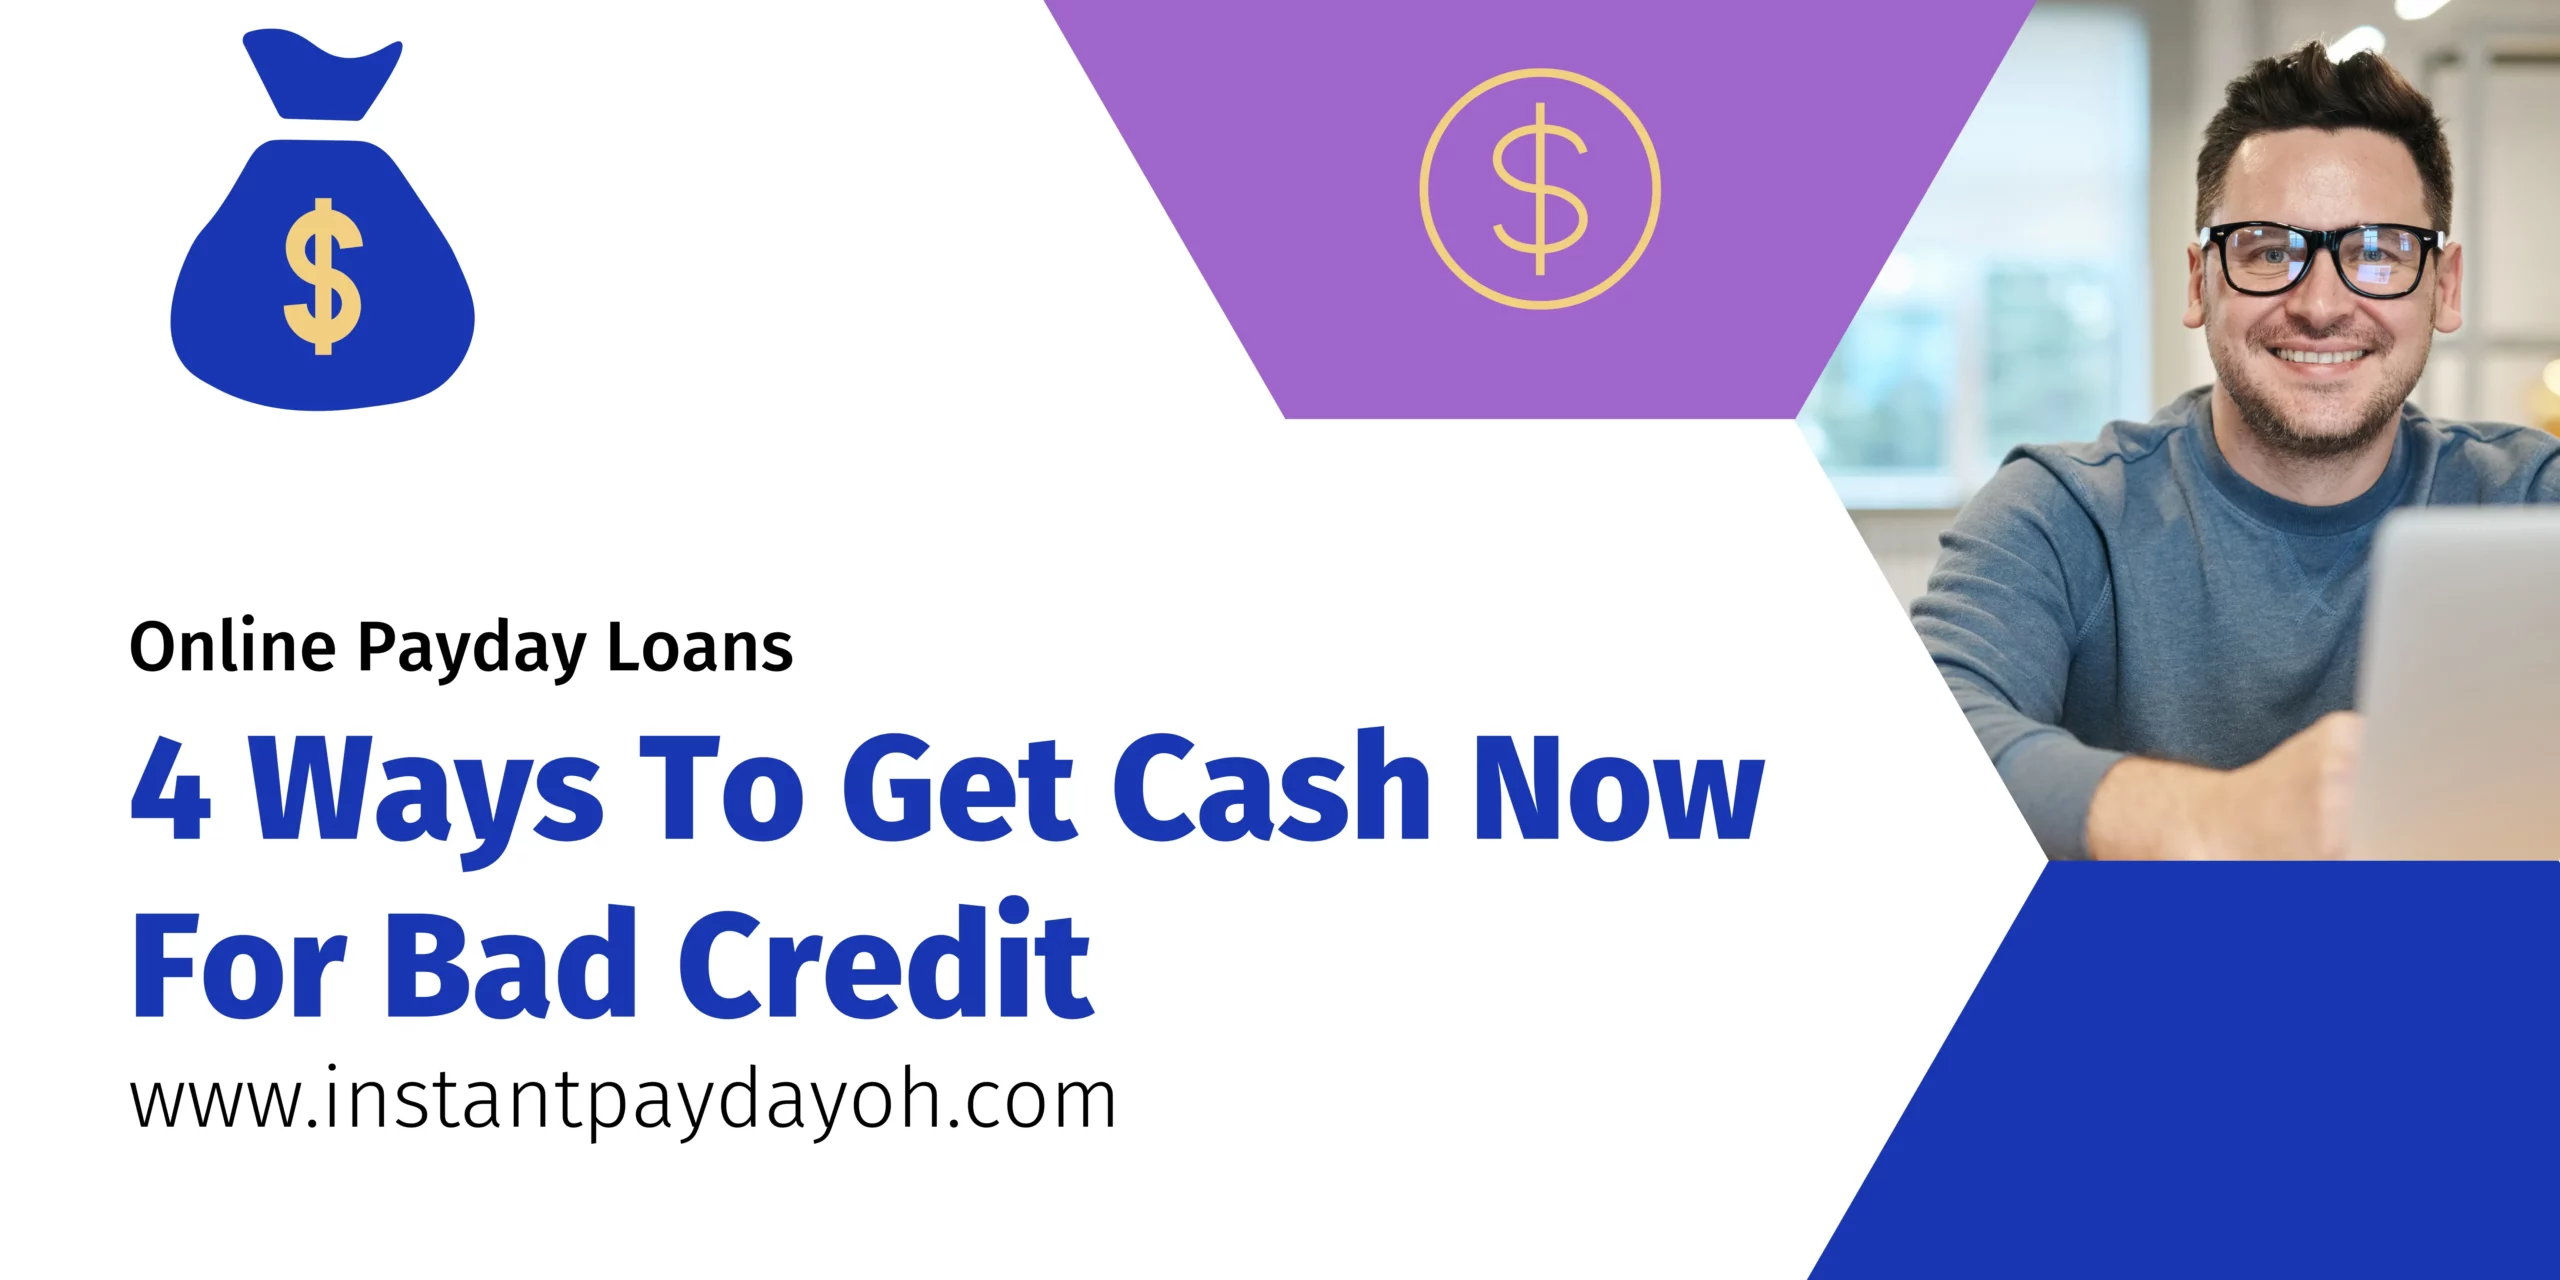 4 Ways To Get Cash Now For Bad Credit